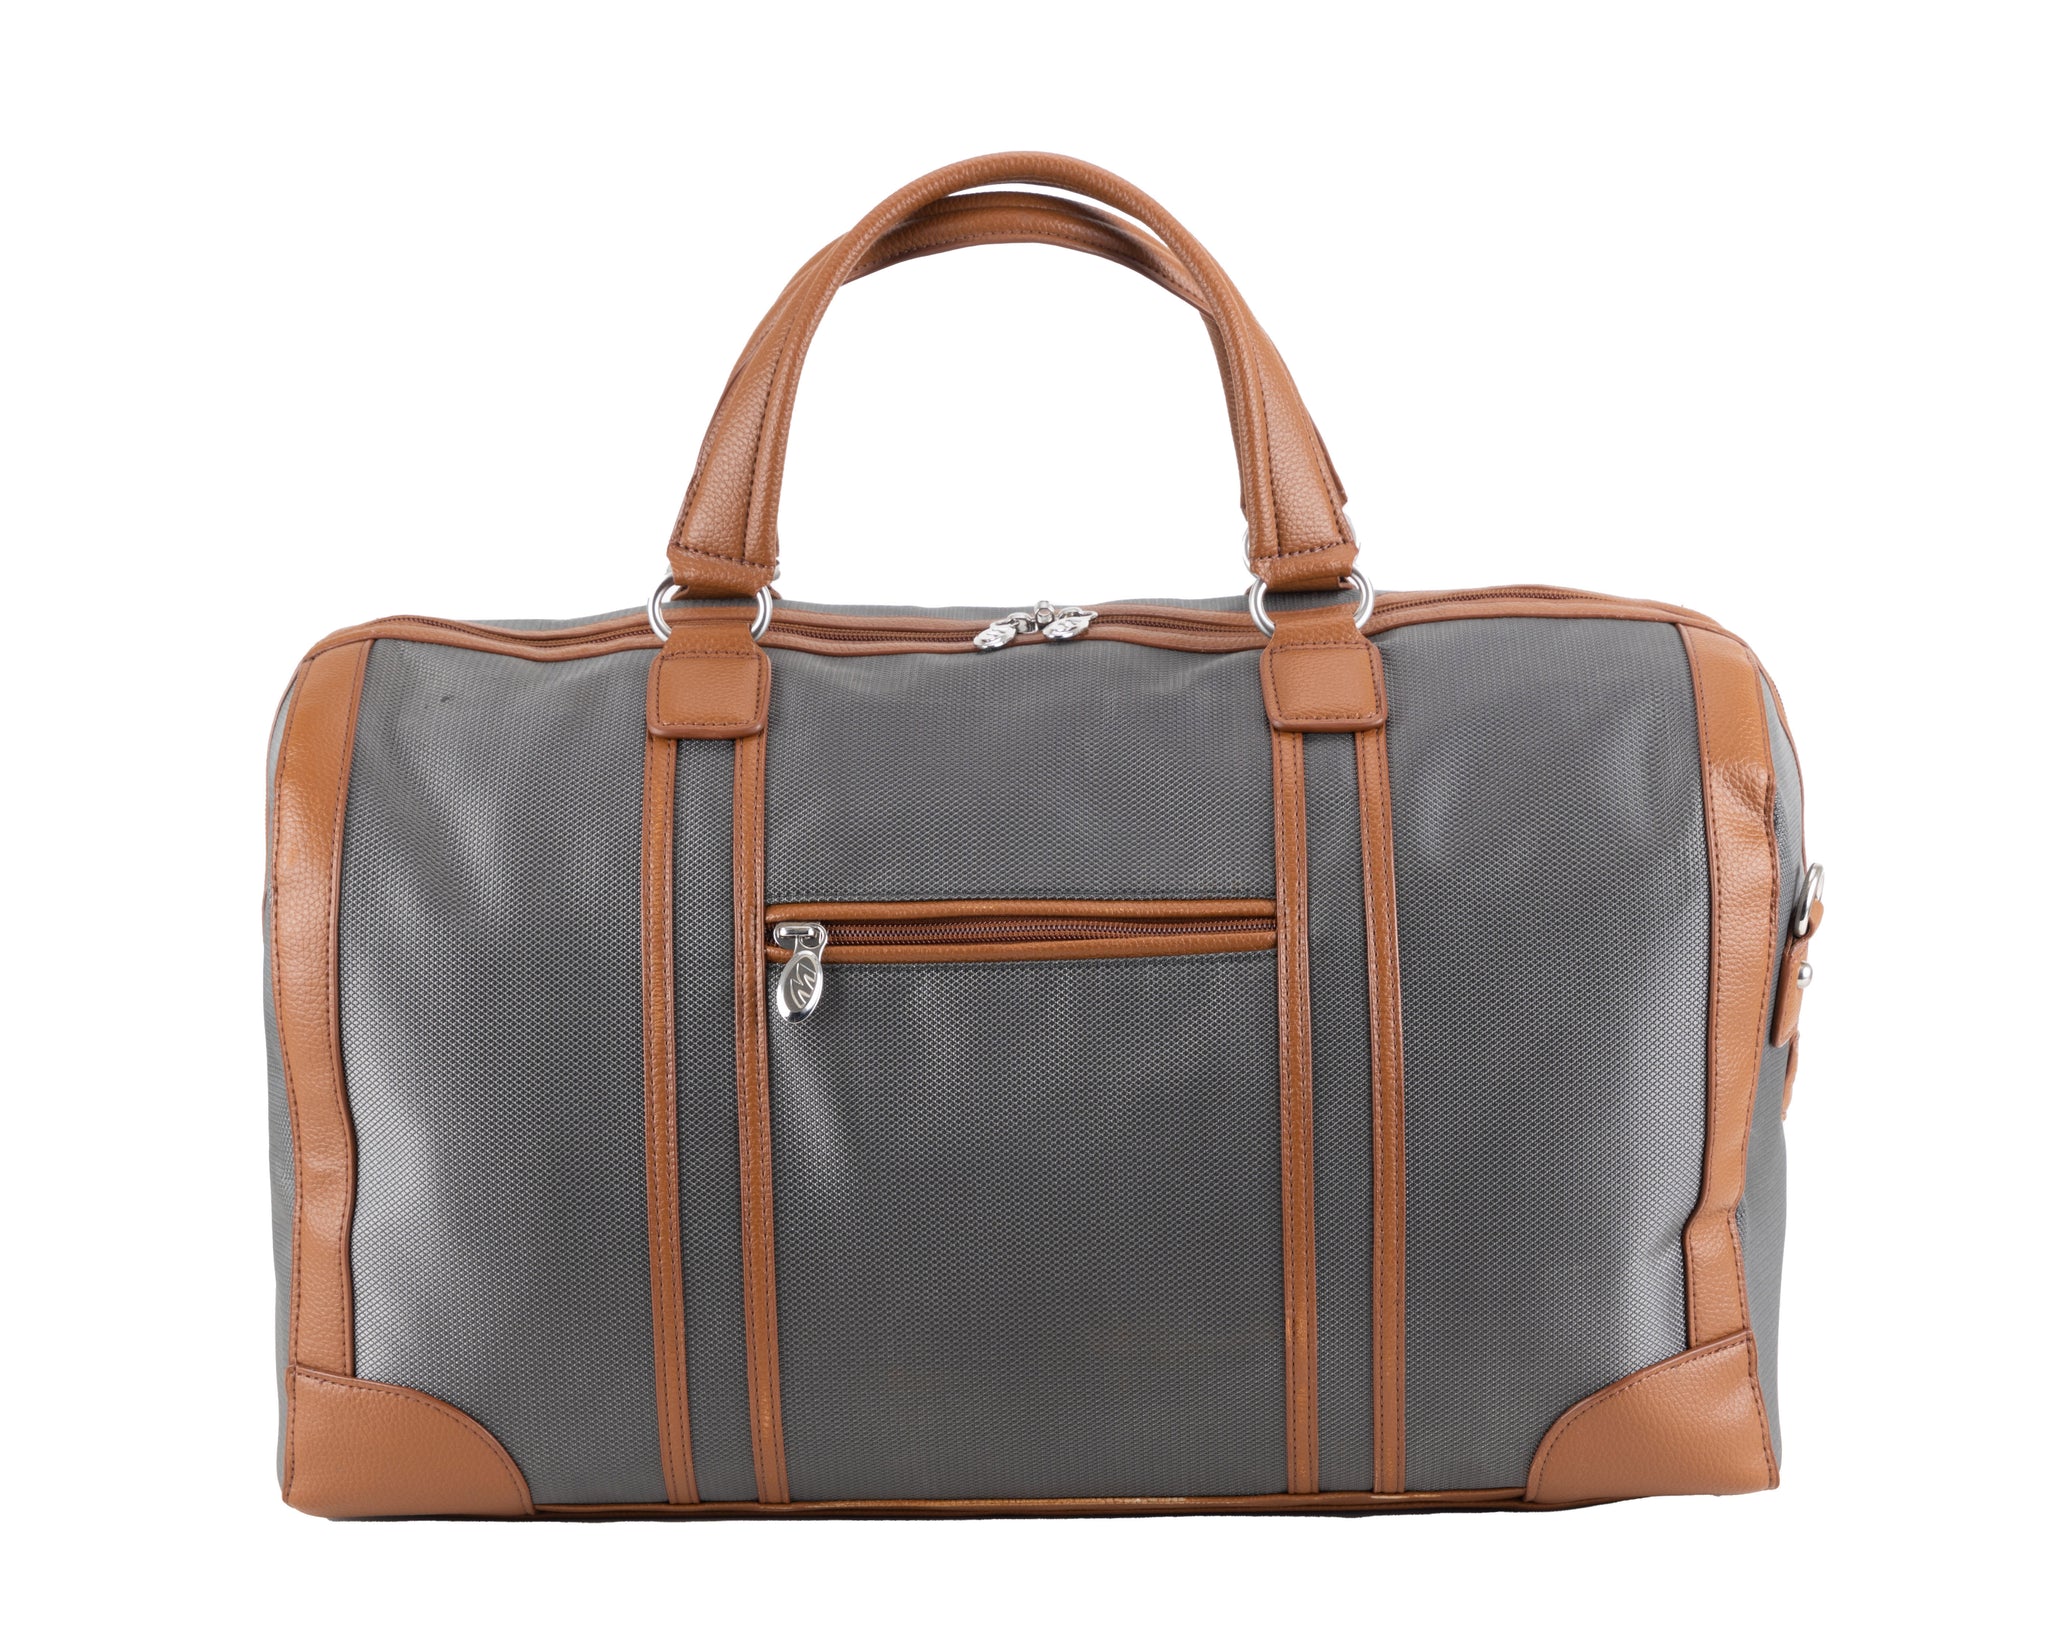 McKlein WEBSTER 20" Nylon Two-Tone, Tablet Overnight Carry-All Duffel